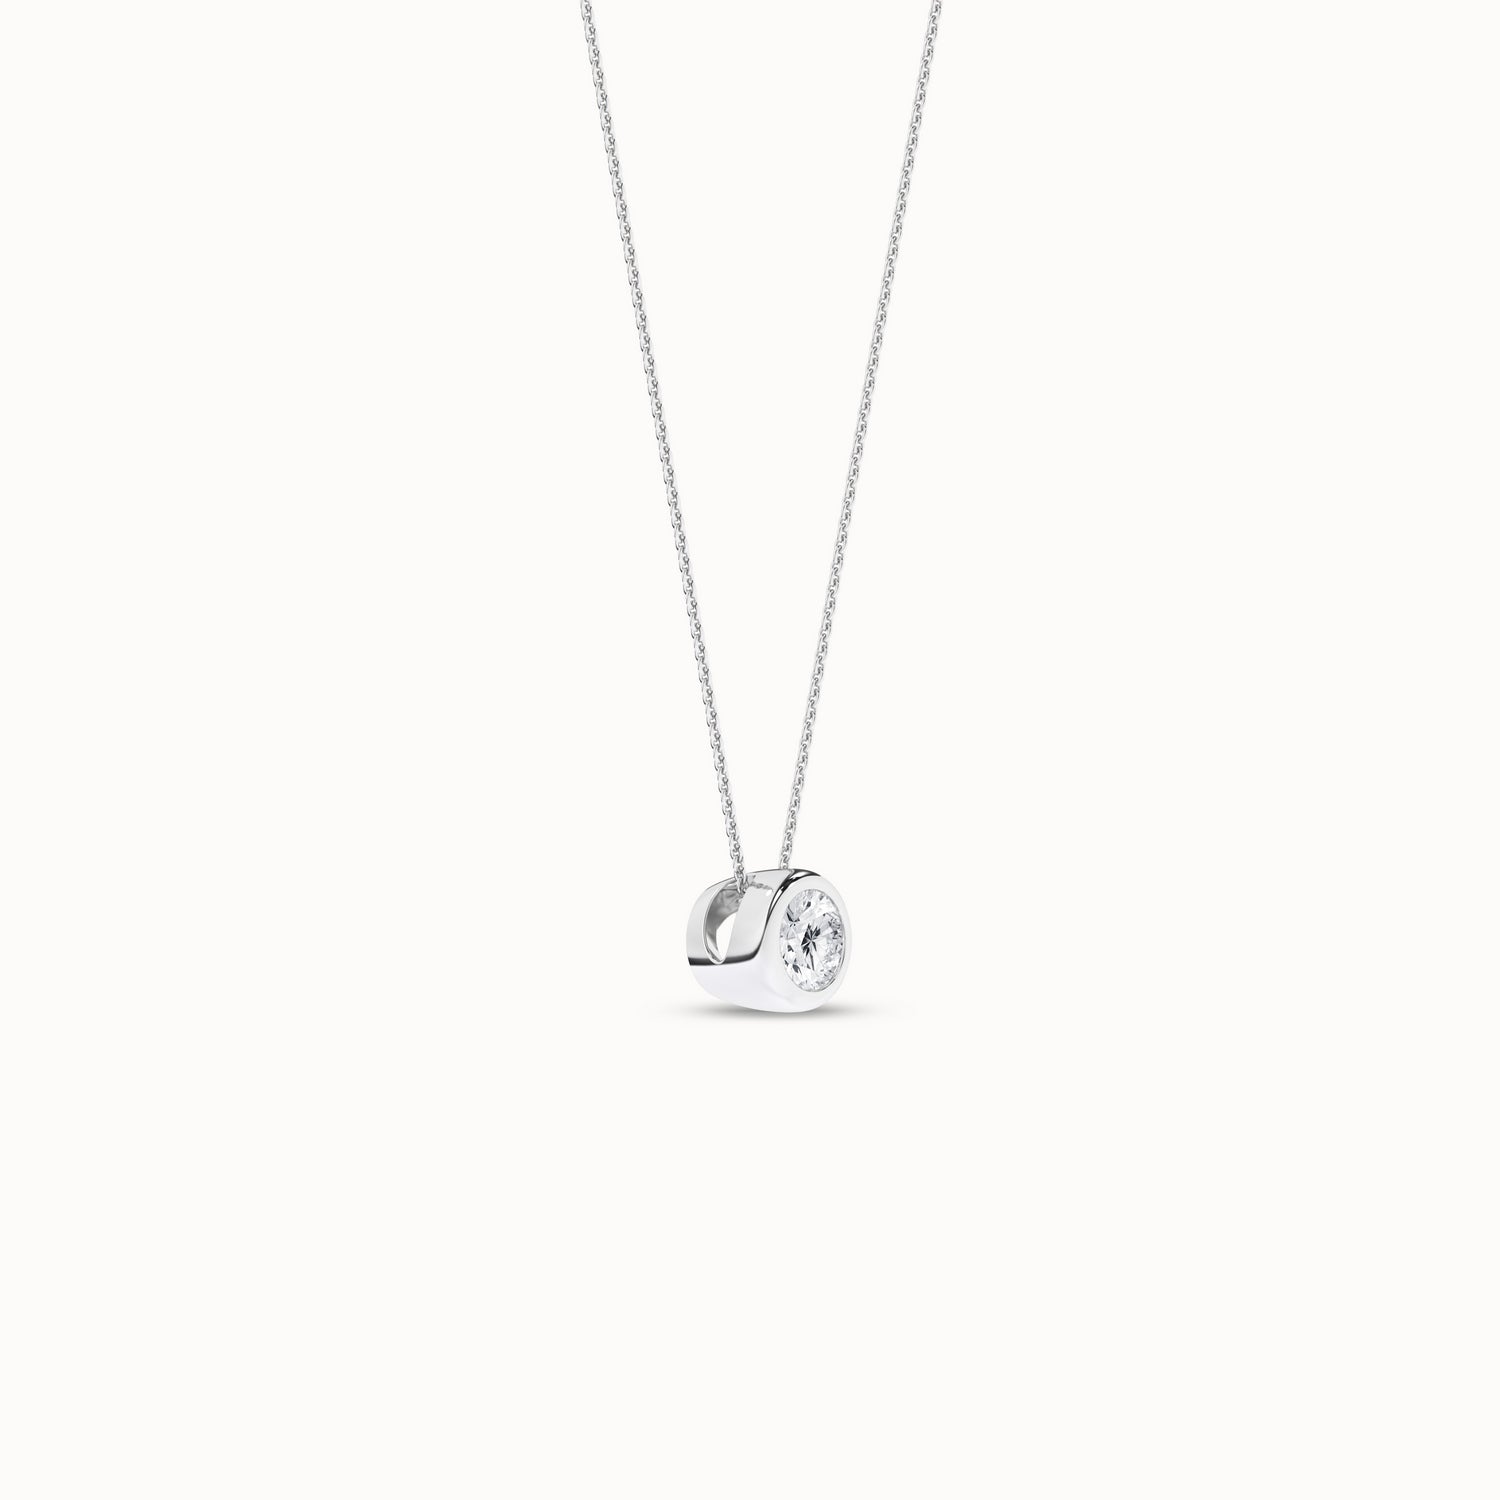 Encompassing Round Necklace_Product Angle_1/6Ct. - 2